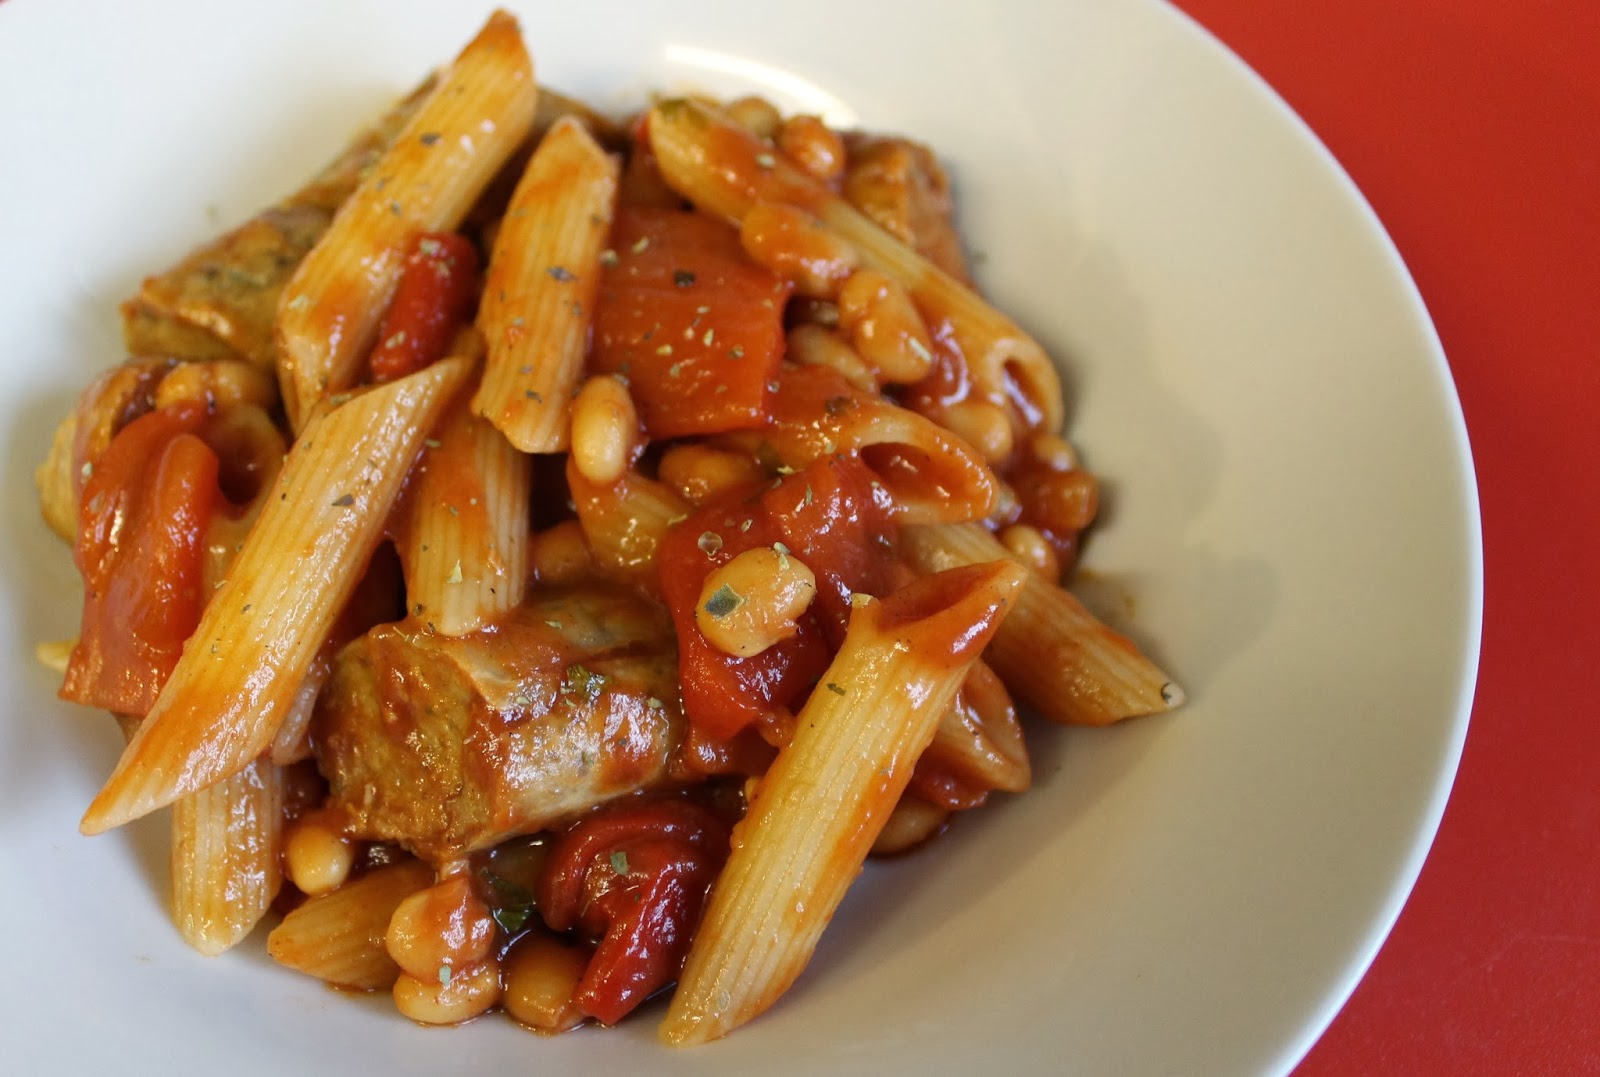 We Don't Eat Anything With A Face: Veggie Sausage & Baked Bean Pasta